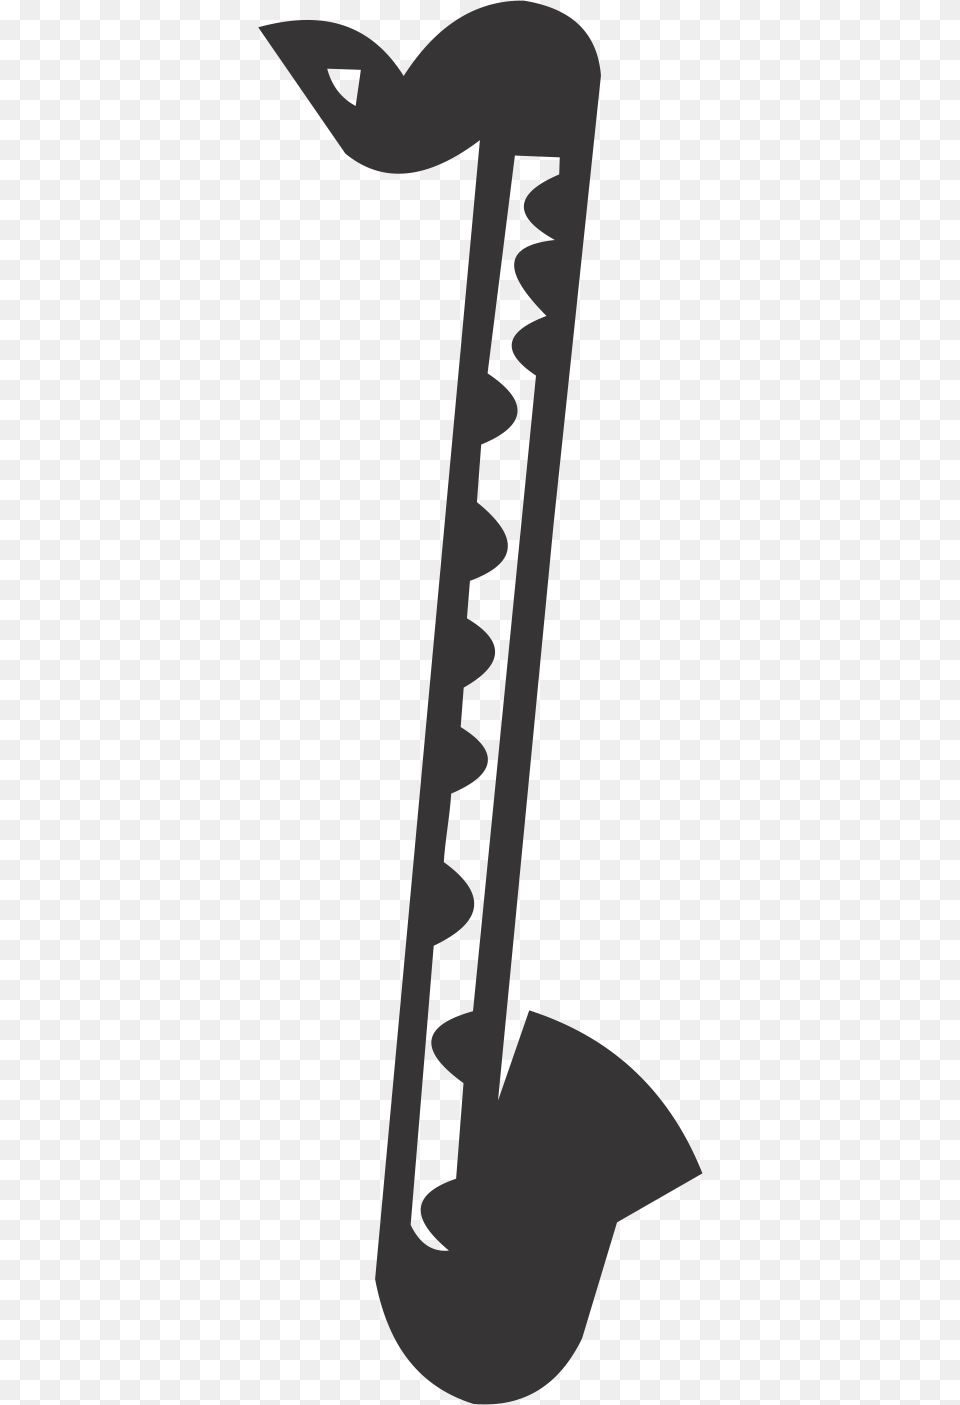 Clarinet Clipart Bass Cute Borders Bass Clarinet Clip Art, Smoke Pipe, Device Free Png Download